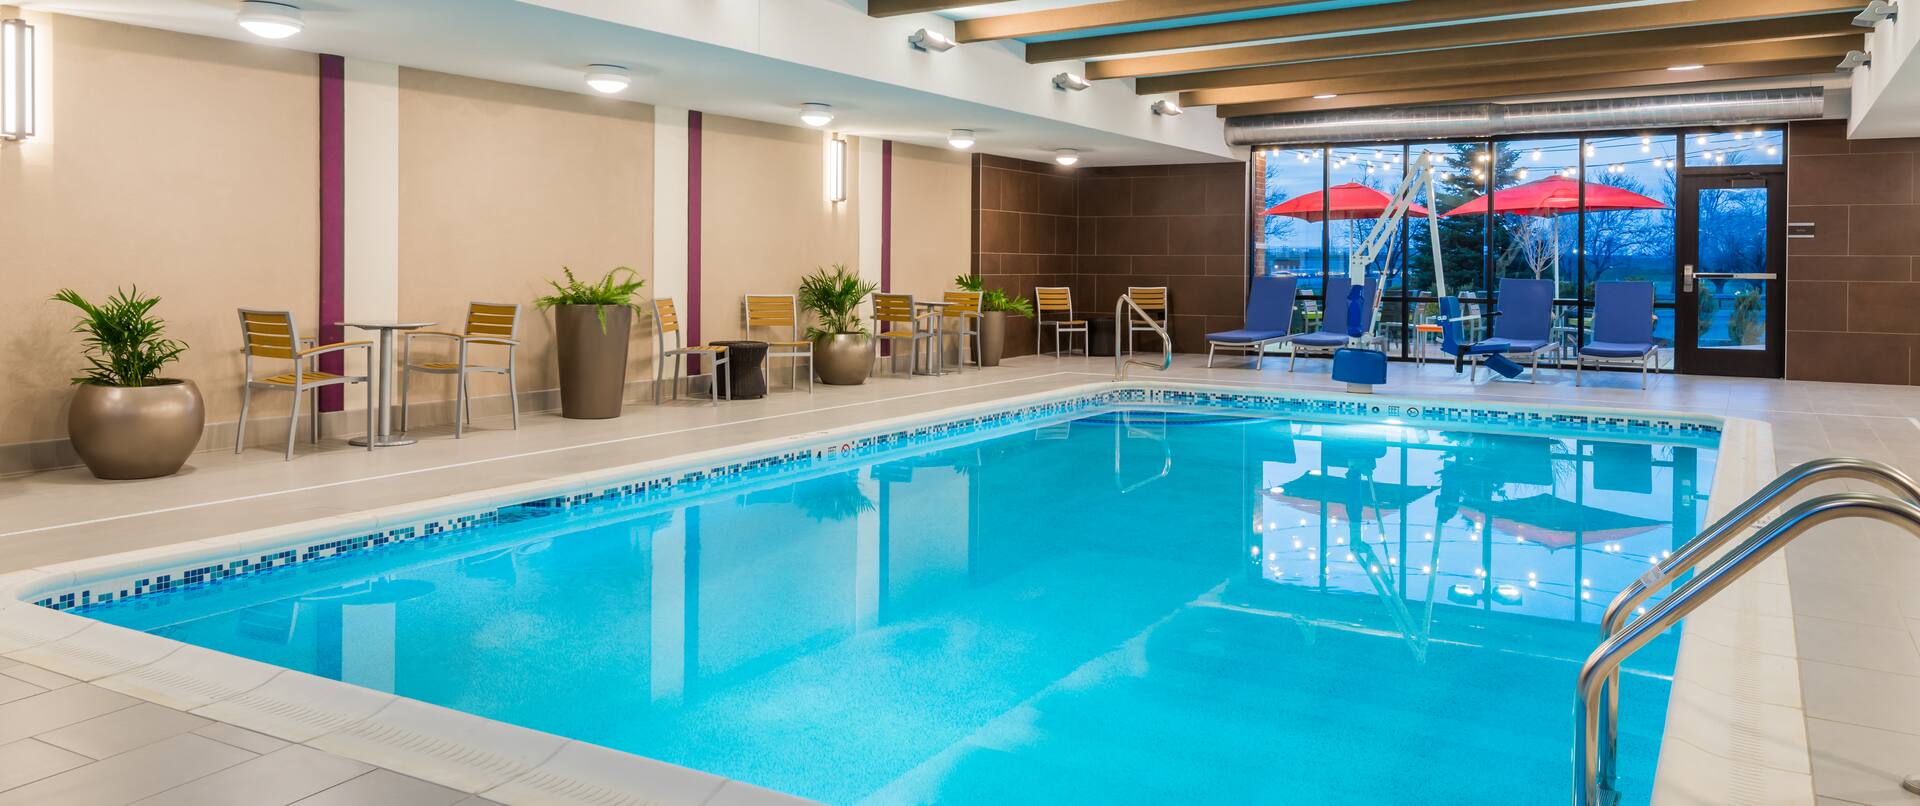 Home2 Suites by Hilton Buffalo Airport/ Galleria Mall Hotel, NY - Indoor Pool